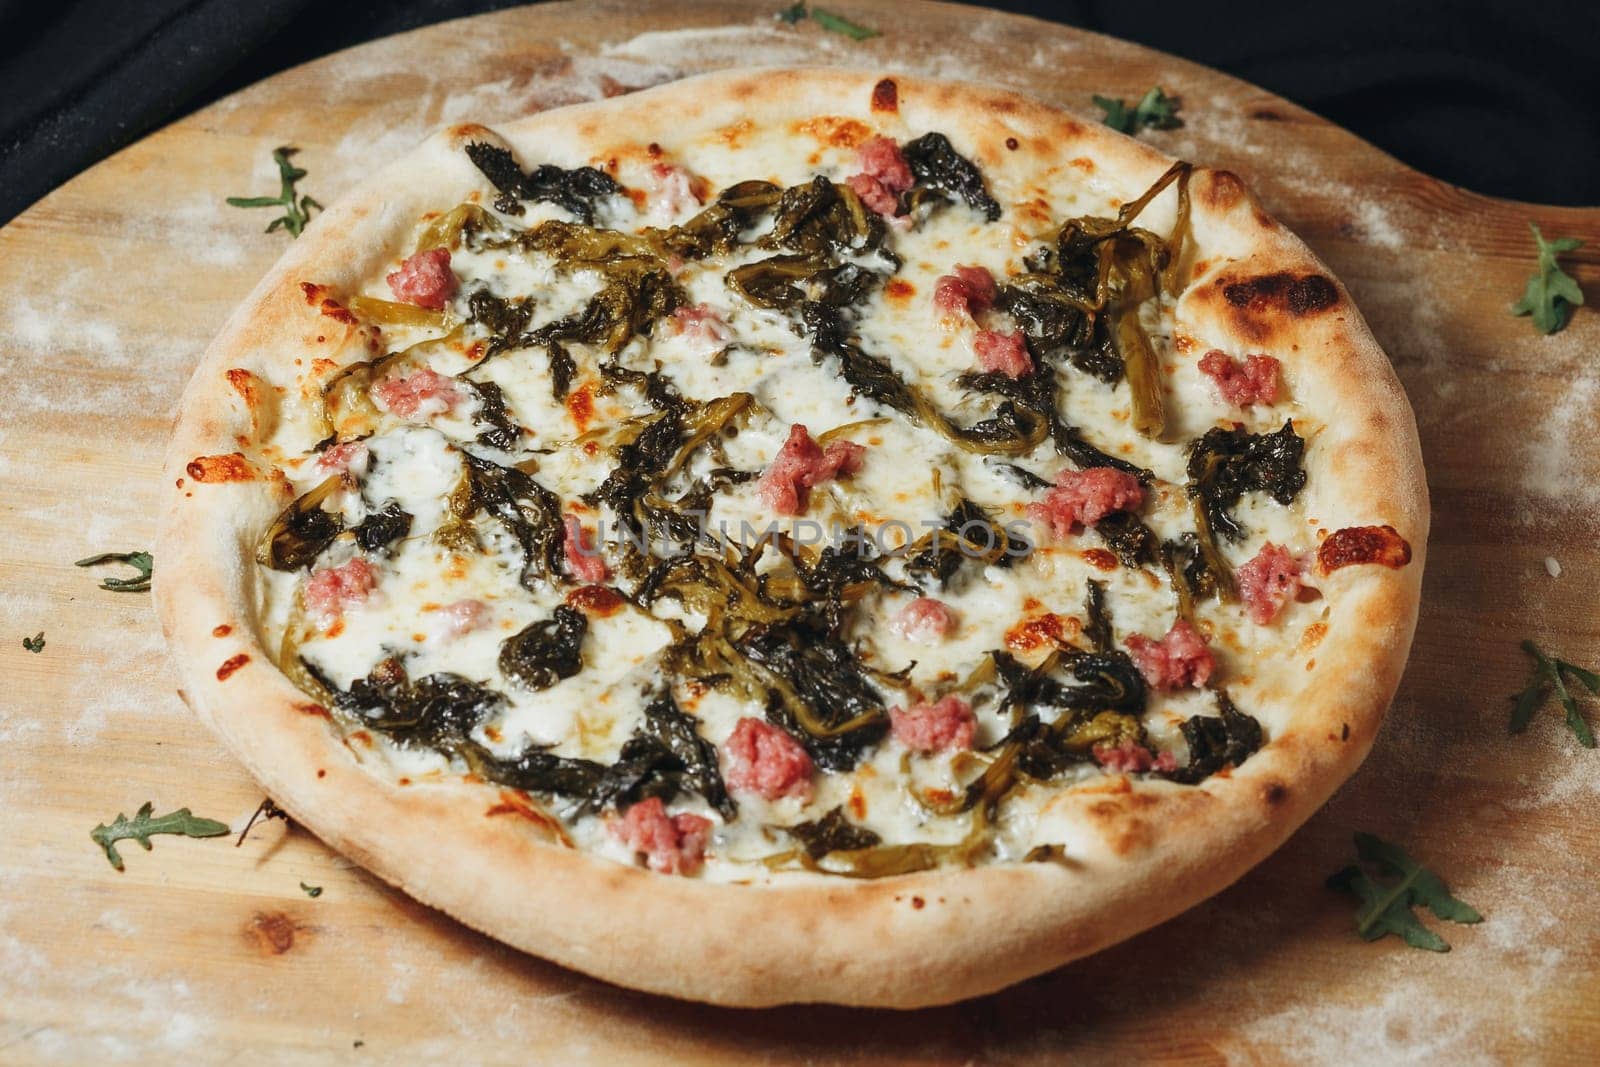 Savory Ham Greens Delight,A mouthwatering pizza by Miron